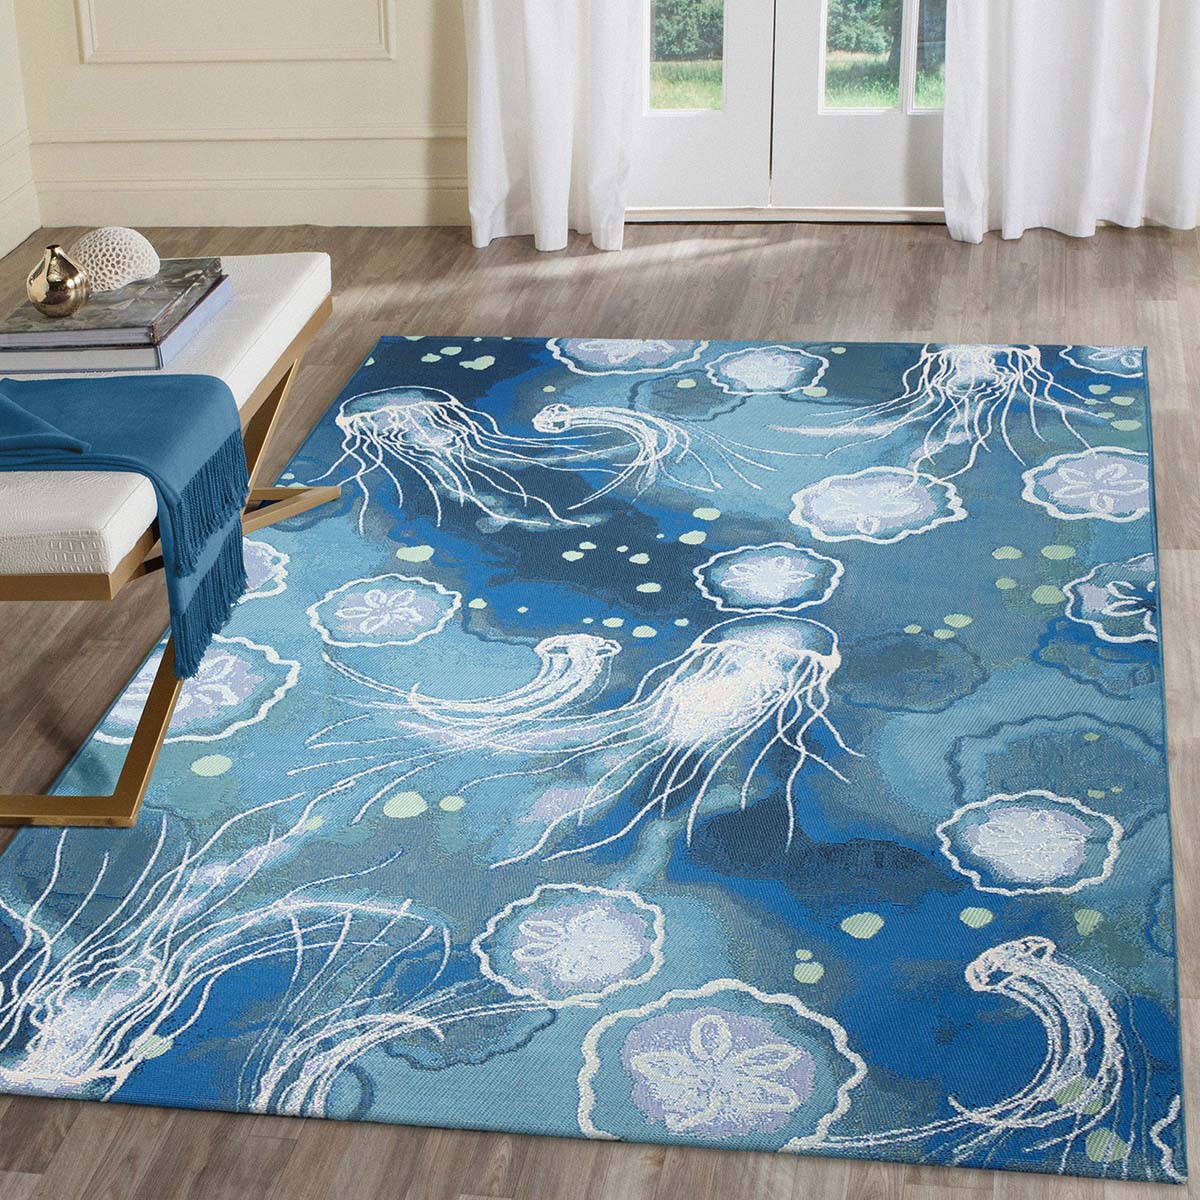 Blue and Gold Intricate Scatter Rug